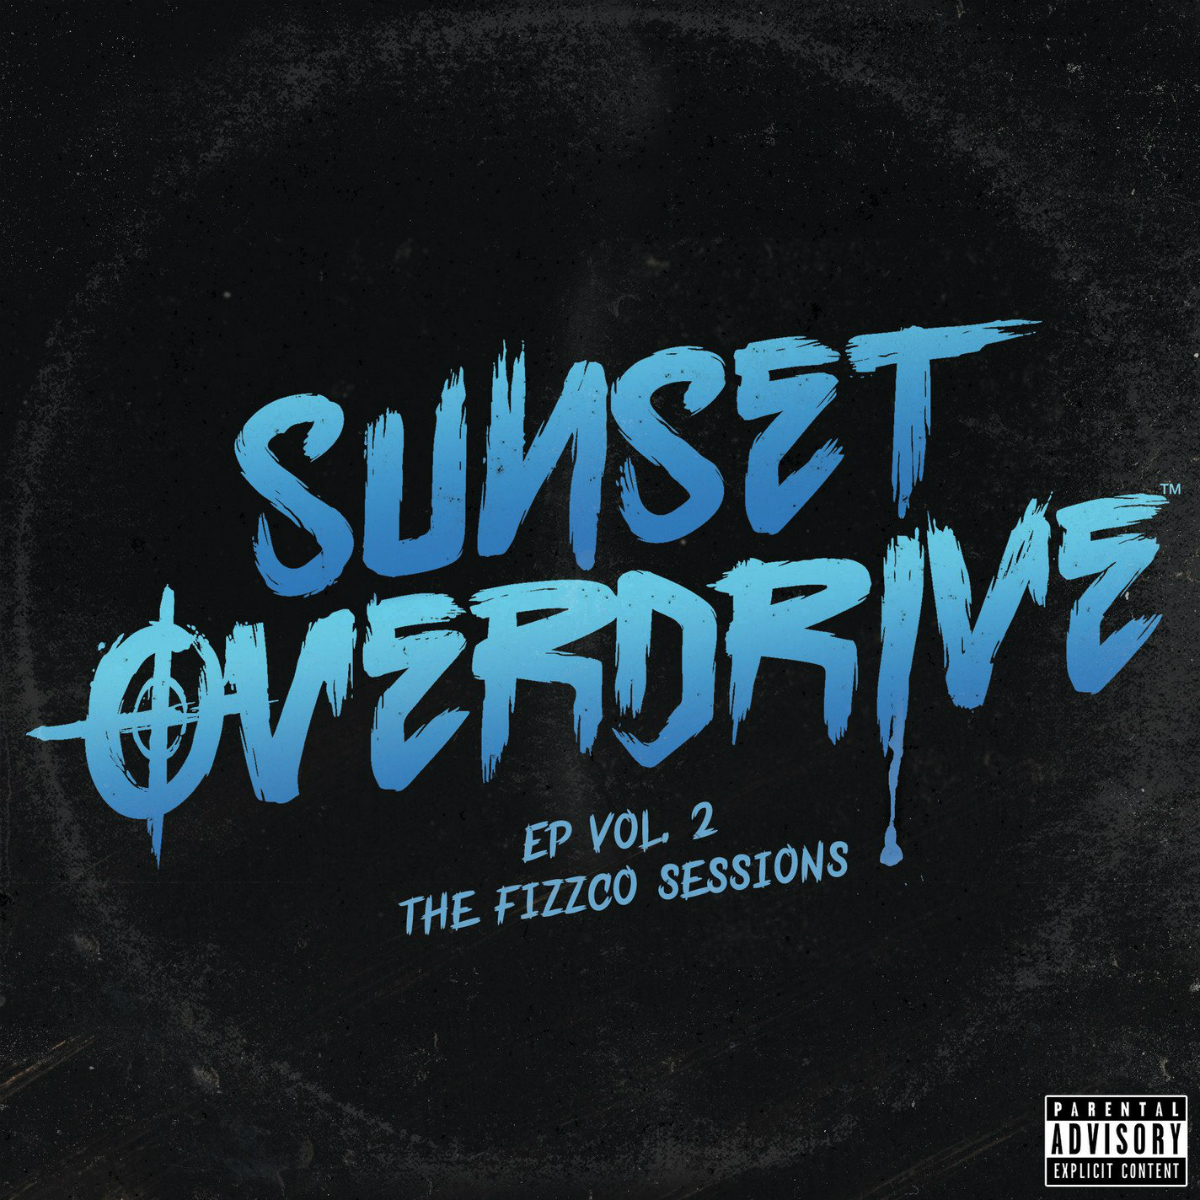 Sunset_Overdrive_EP_2_cover1200x1200.jpg